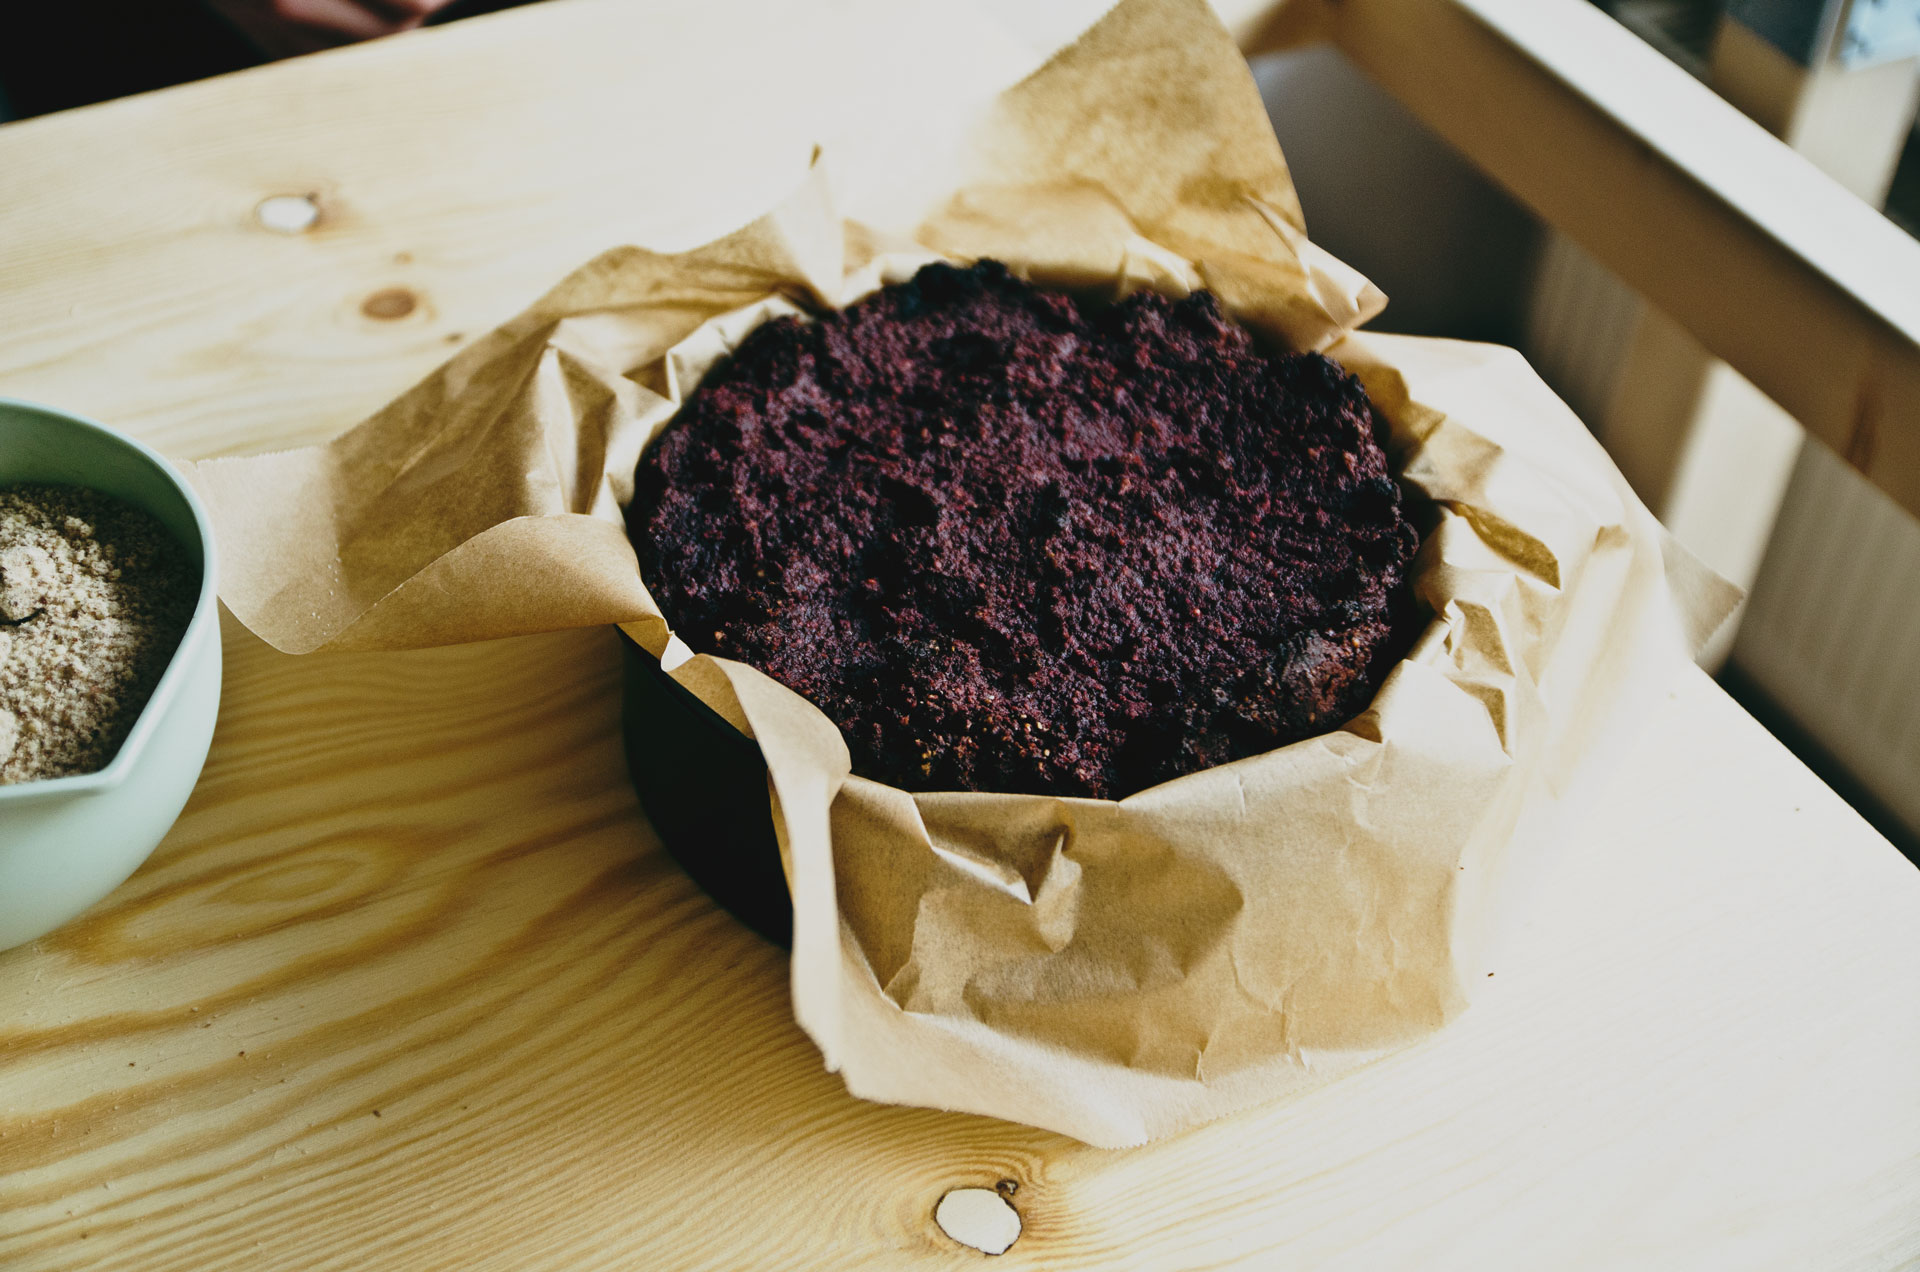 Berlin Kombucha Society's delicious and healthy recipe for a flourless Beetroot and Almond Cake